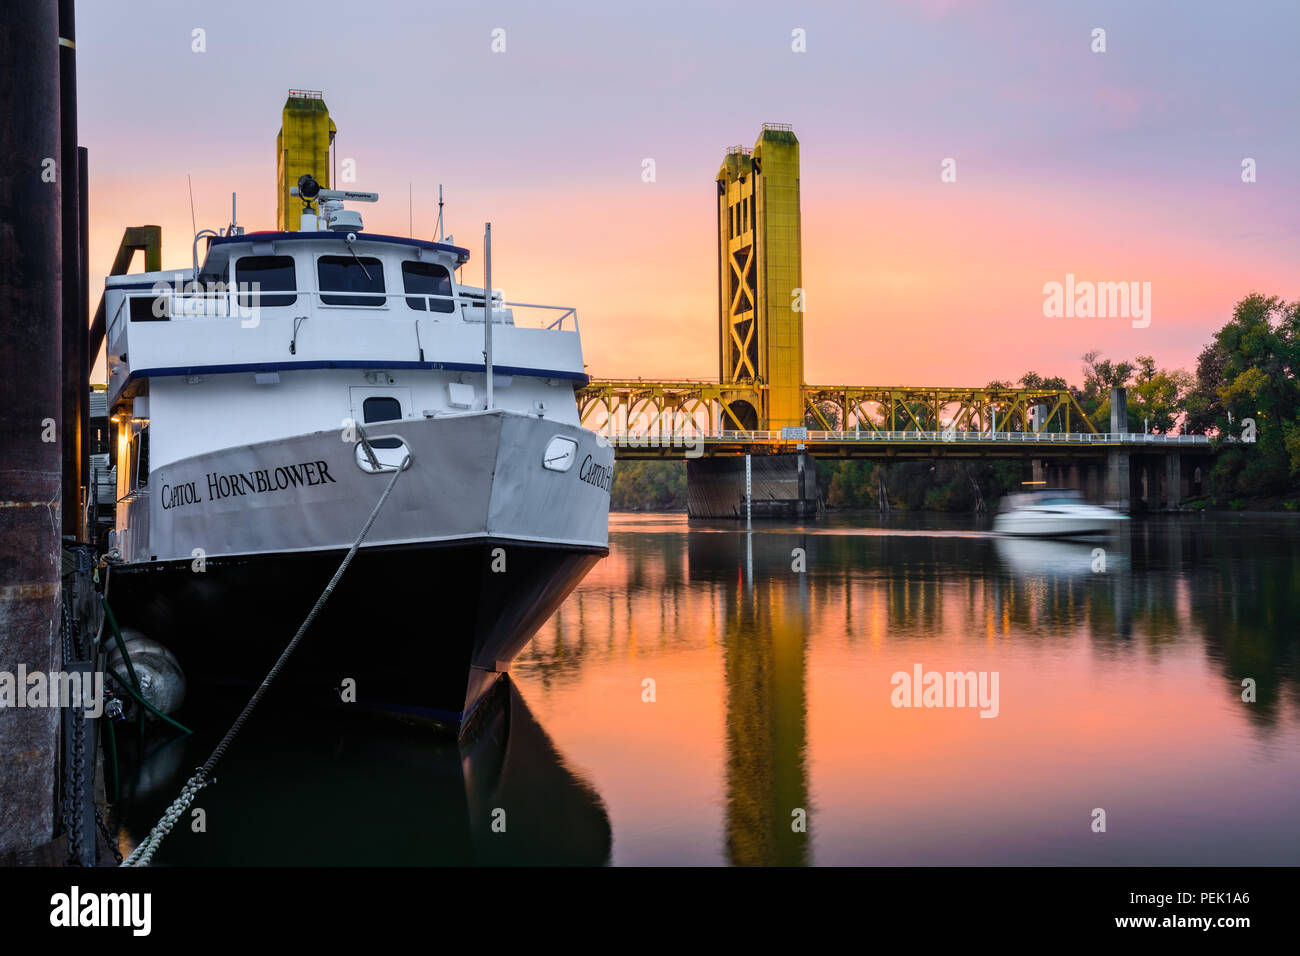 The Capitol Hornblower docked in Old Sacramento as the sun rises over the Tower Bridge and the Sacramento River in Sacramento, California. Stock Photo